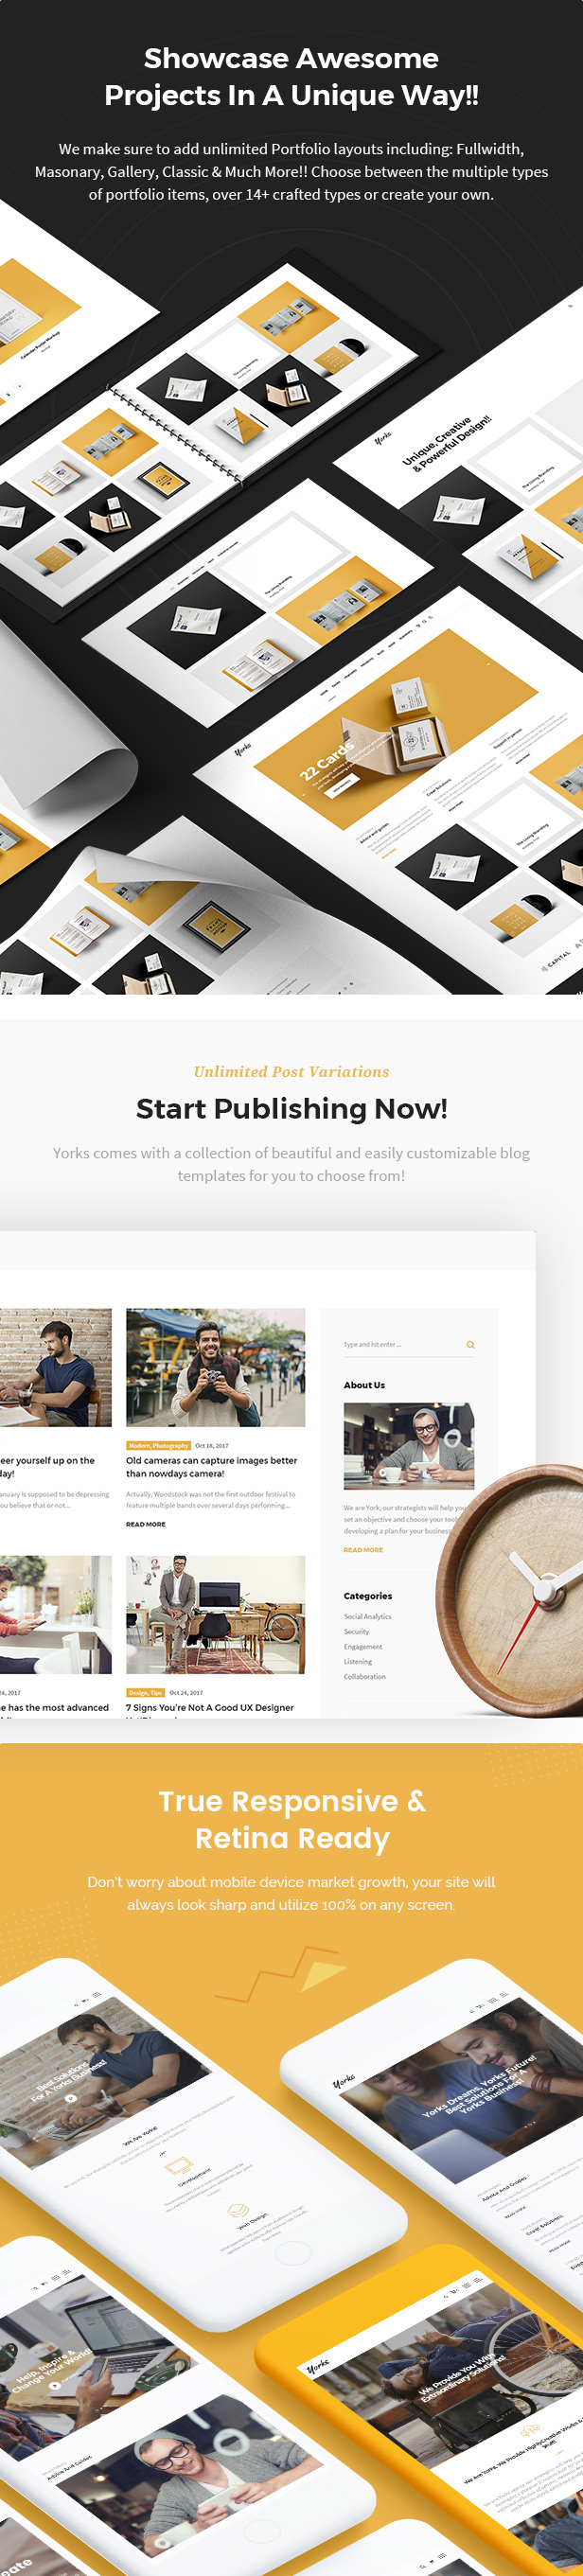 Yorks - Modern HTML5 Template For Businesses & Individuals - 7